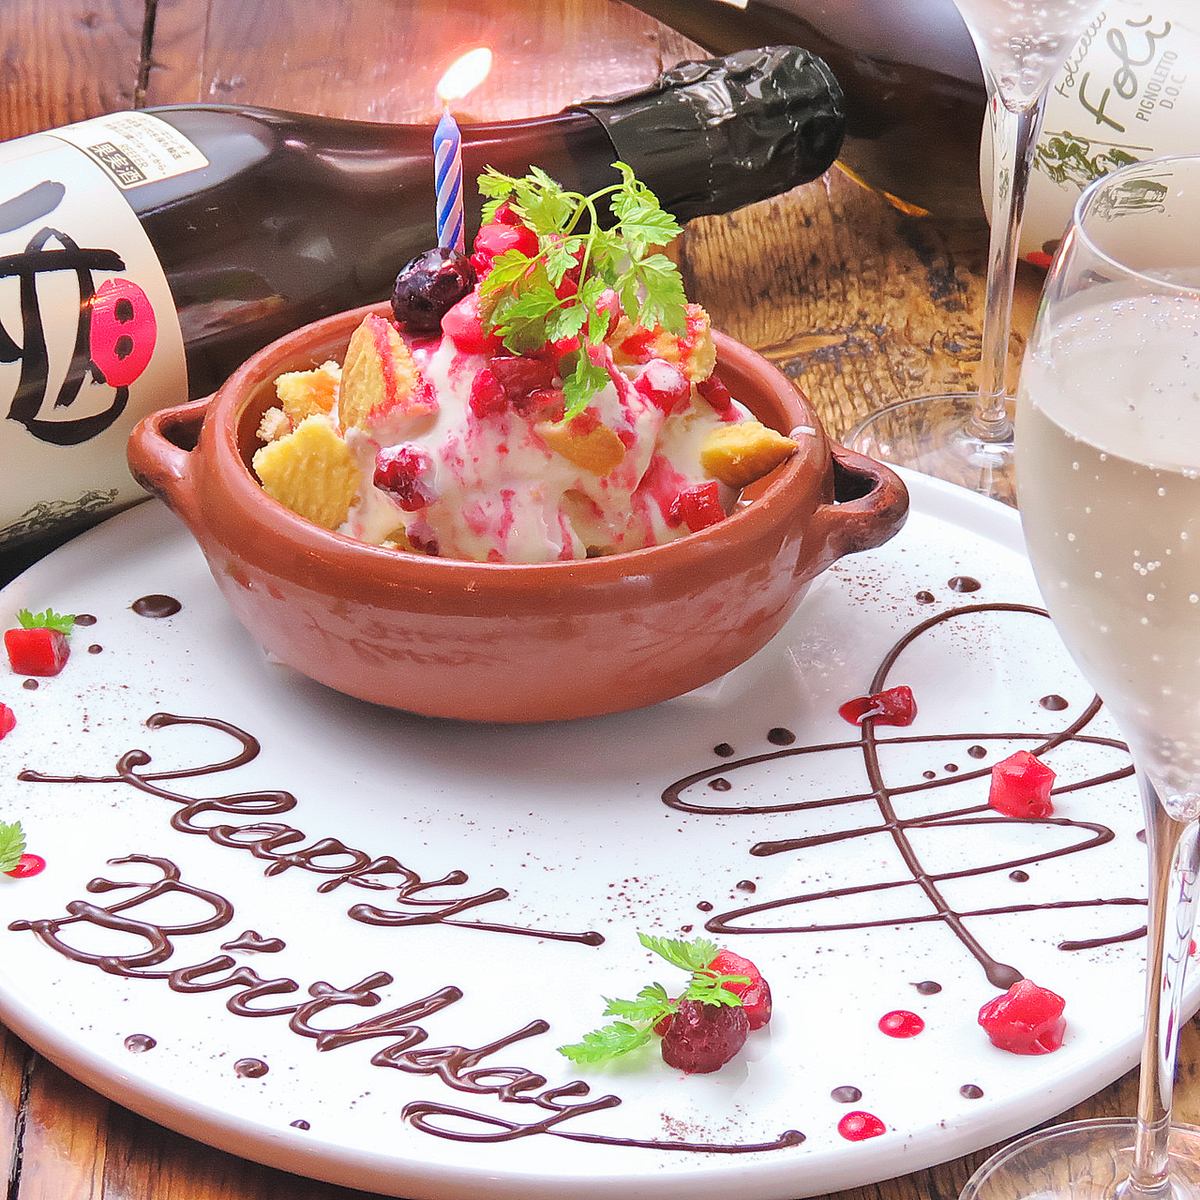 On your birthday ◎ Change the course dessert to a surprise plate OK